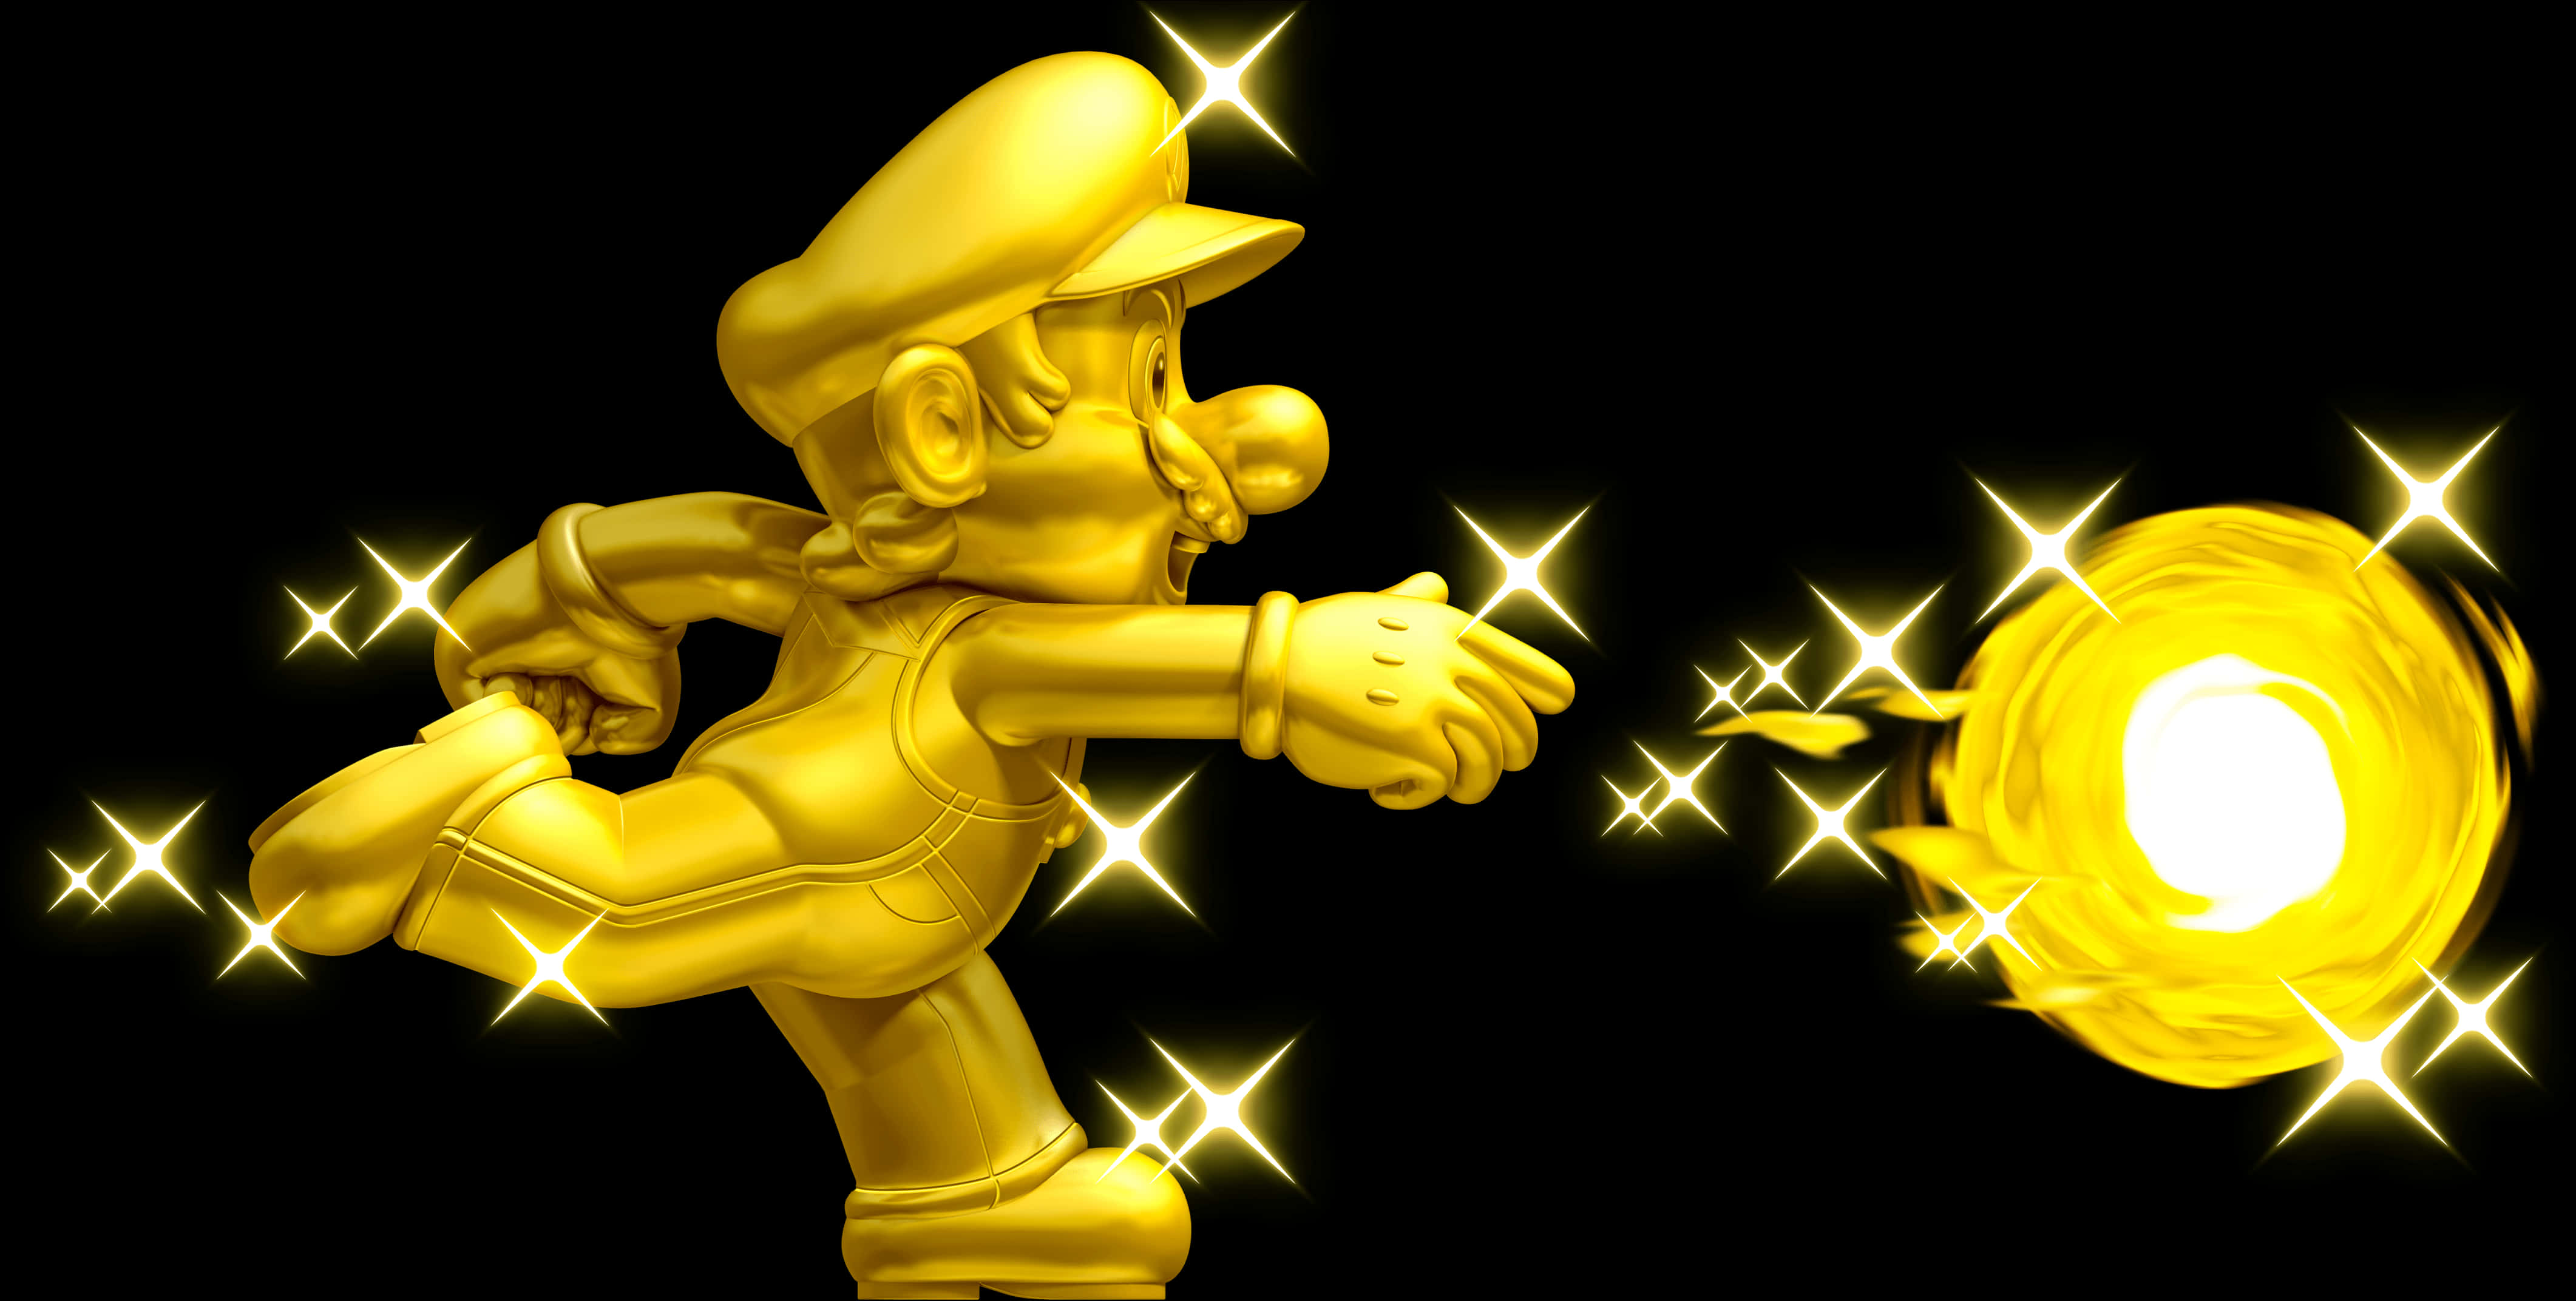 A Gold Statue Of A Man Throwing A Ball PNG